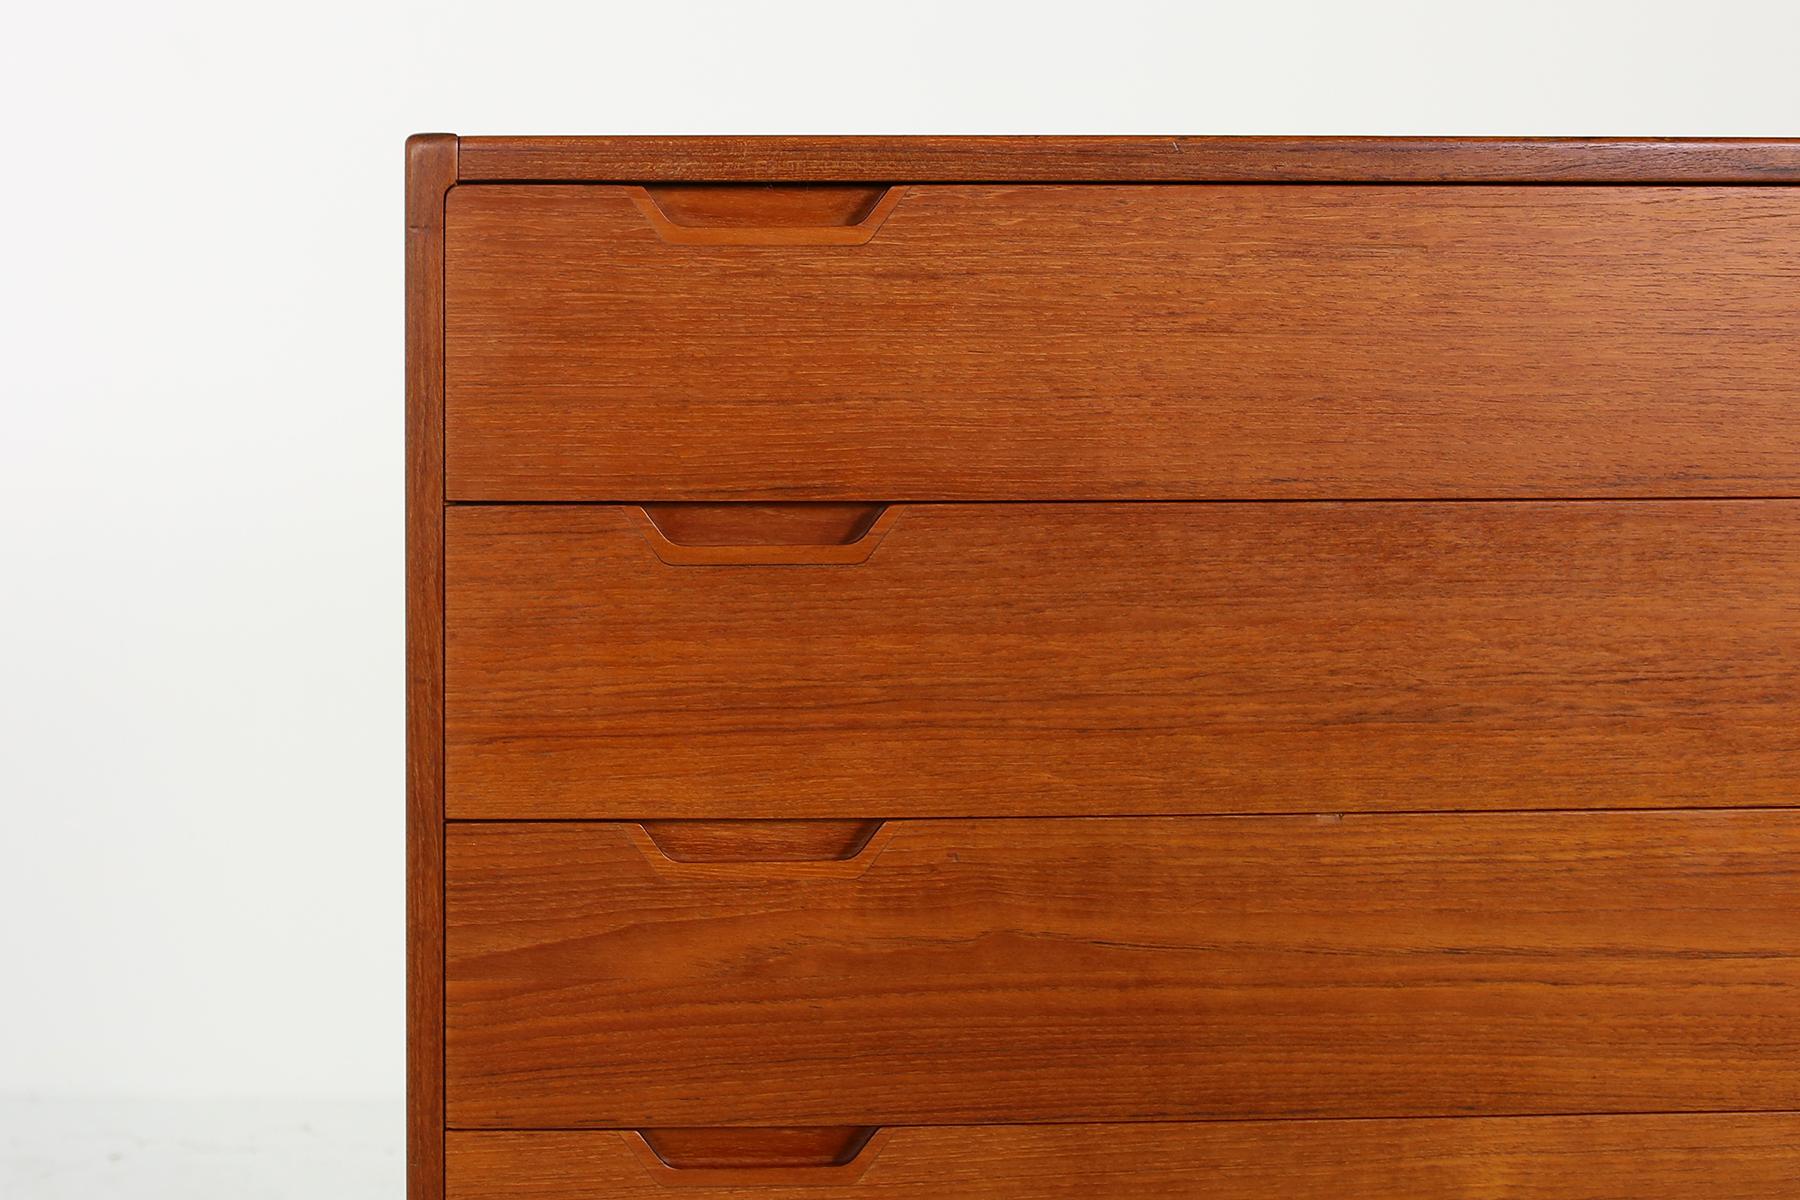 Super rare and beautiful Danish modern design Svend Langkilde chest of six drawers in a fantastic condition. This is a very rare model in authentic condition, from the 1960s Danish modern design. Beautiful shades of the teak, solid drawers. Produced